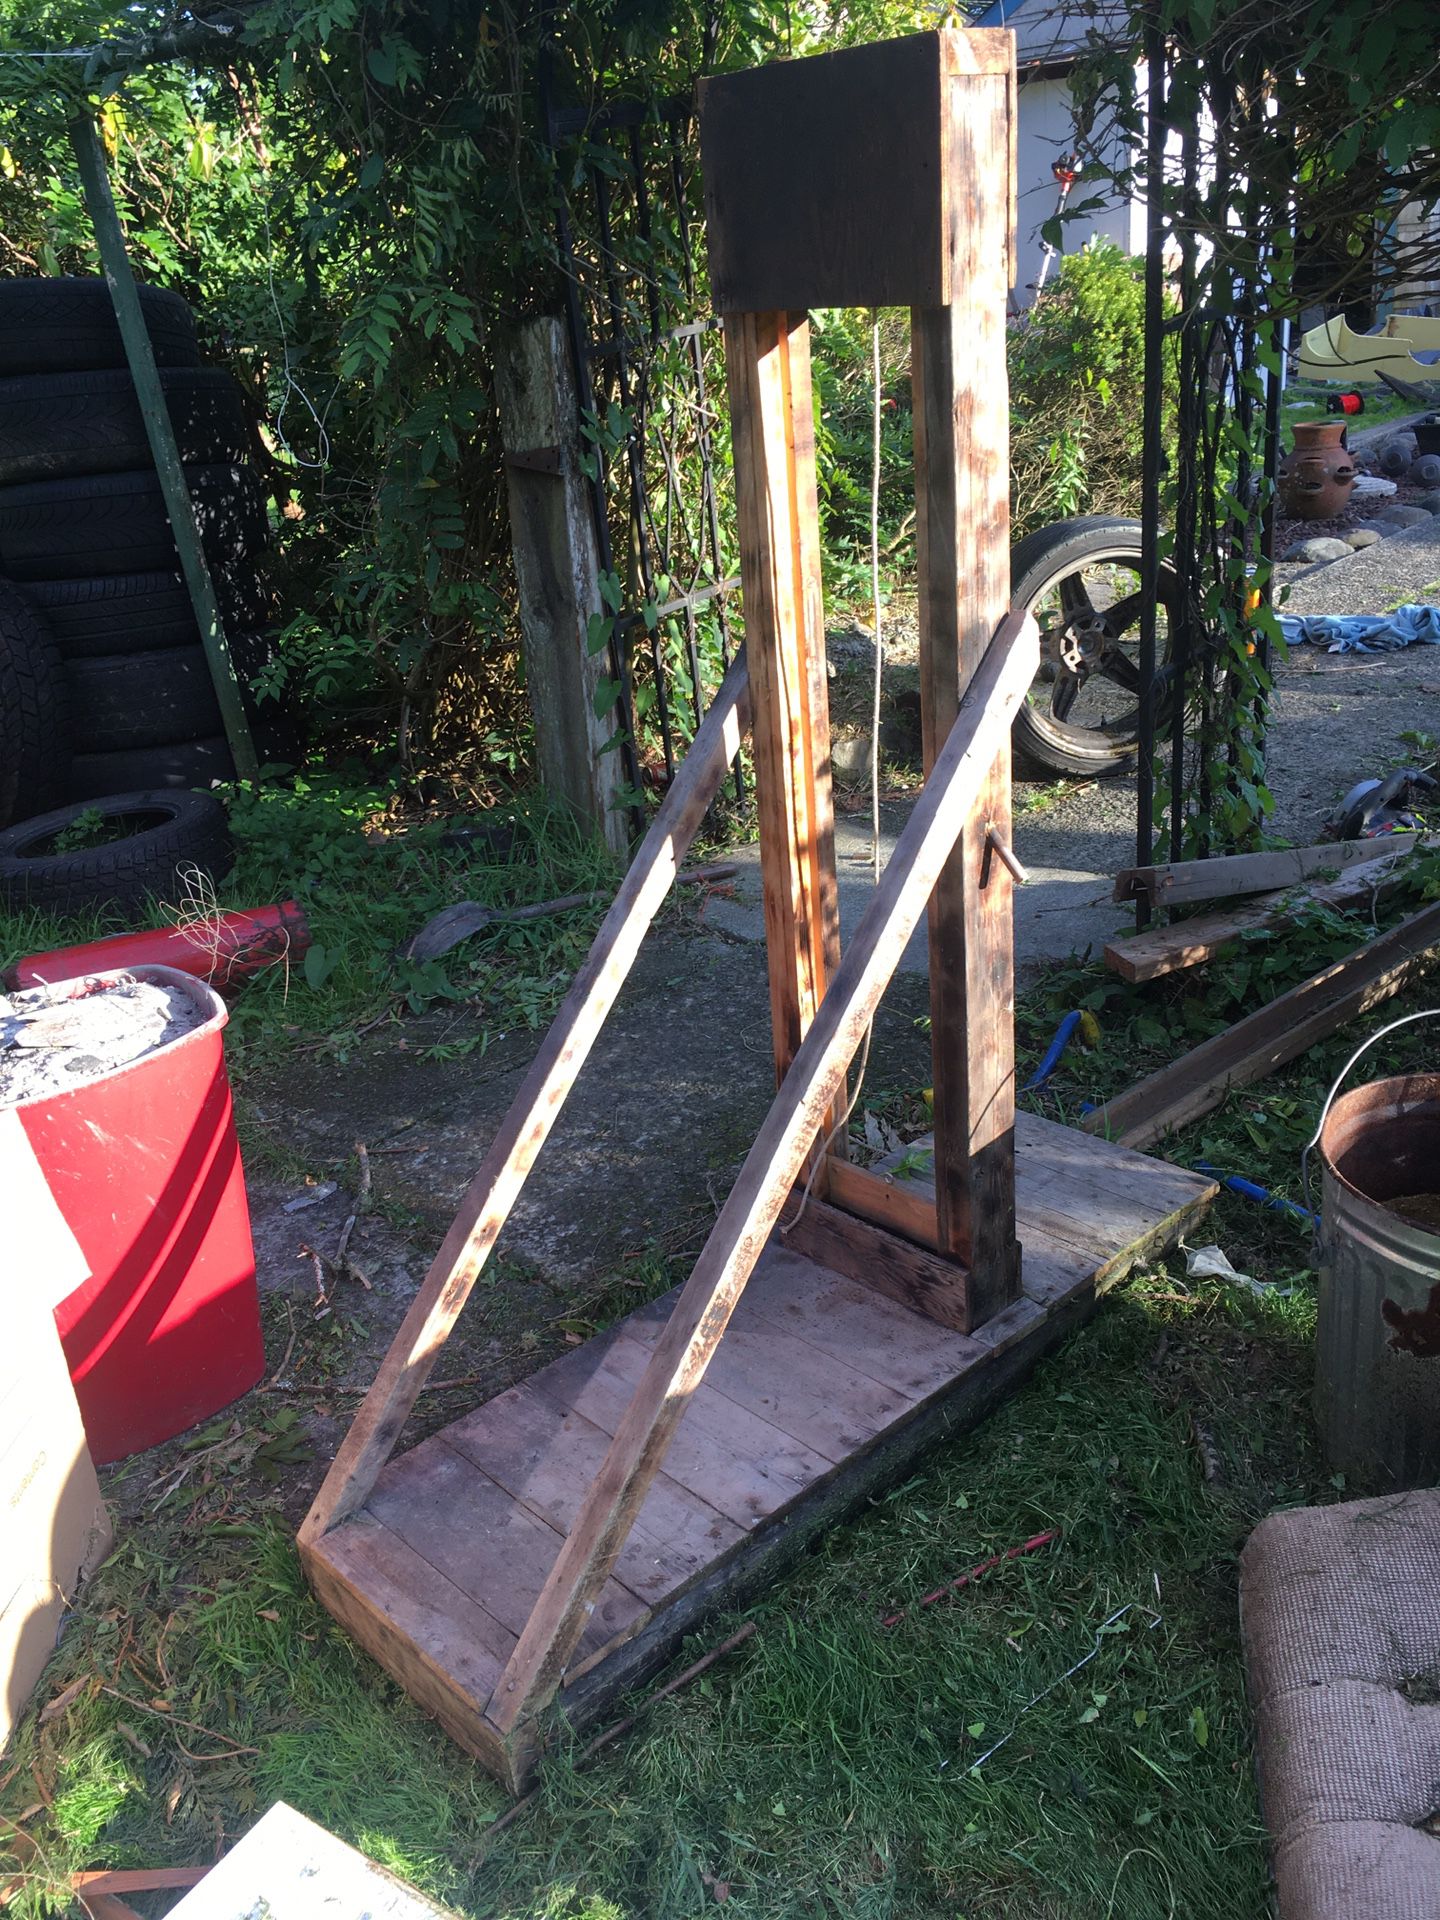 Functioning guillotine